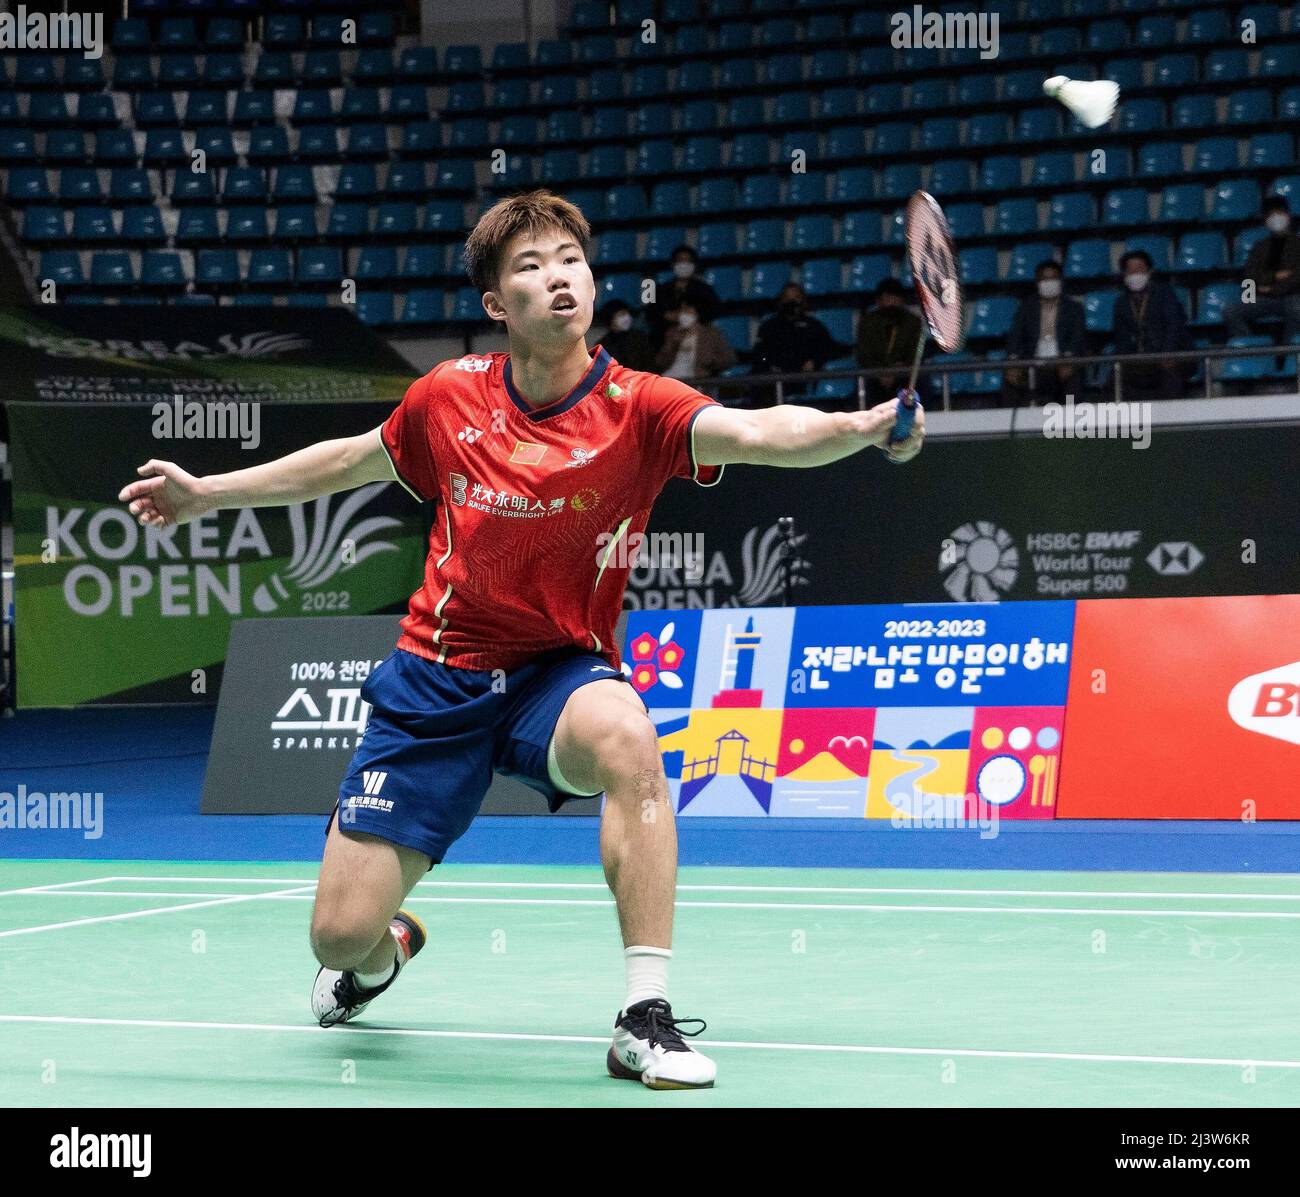 Suncheon, South Korea. 10th Apr, 2022. Weng Hongyang of China hits a return  during the men's singles final match against Jonatan Christie of Indonesia  at the BWF Korea Open Badminton Championships 2022